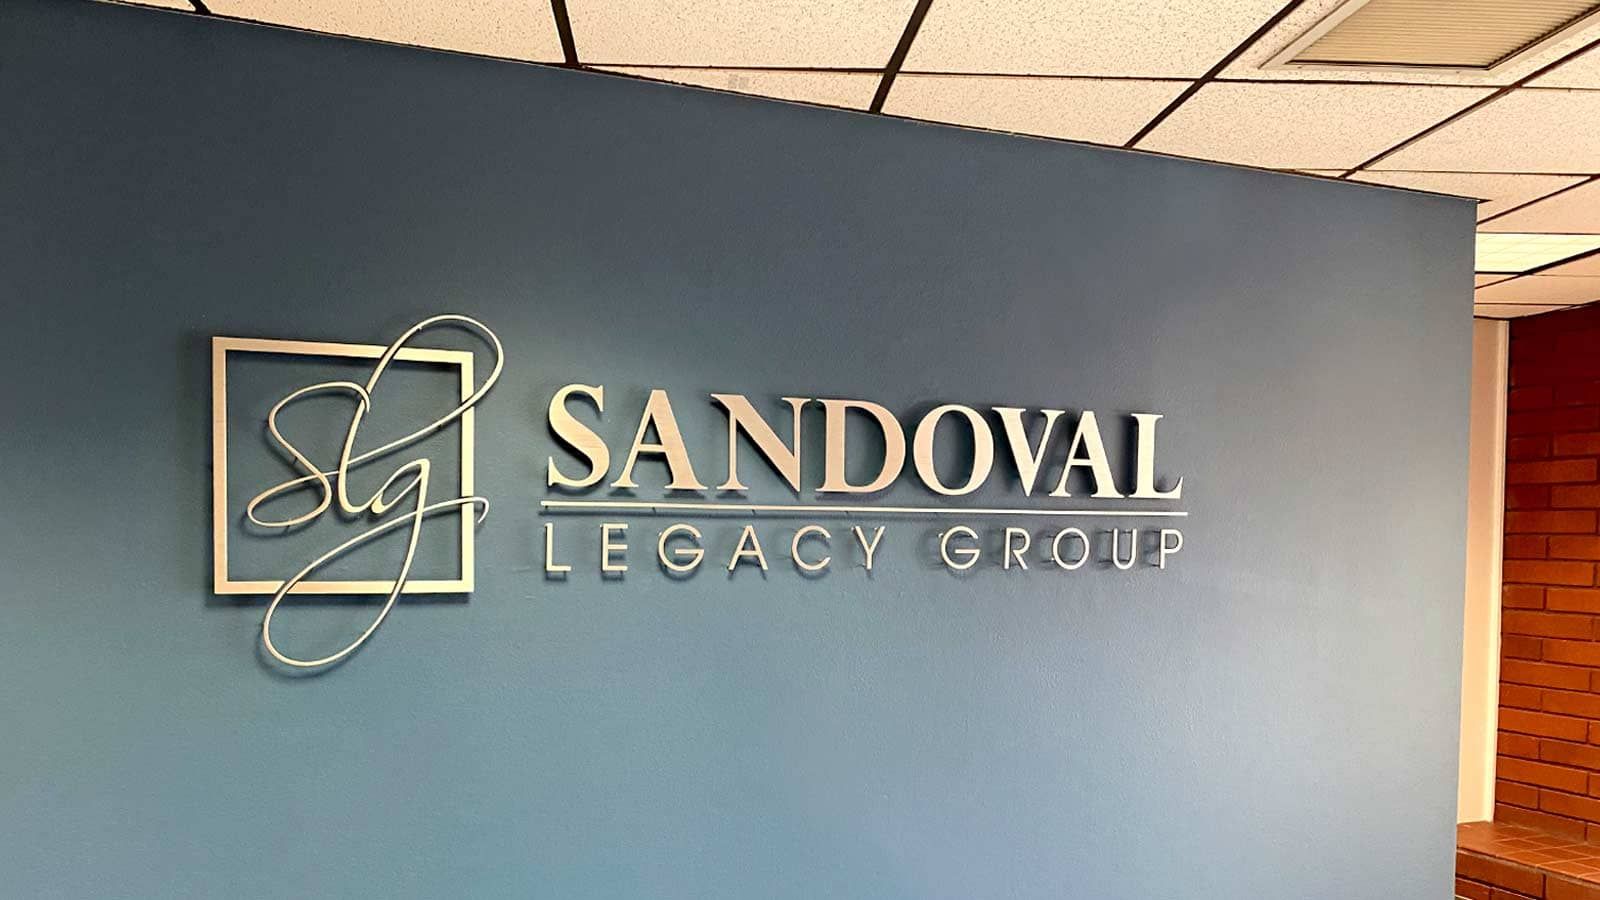 Sandoval Legacy Group 3D sign for interior branding